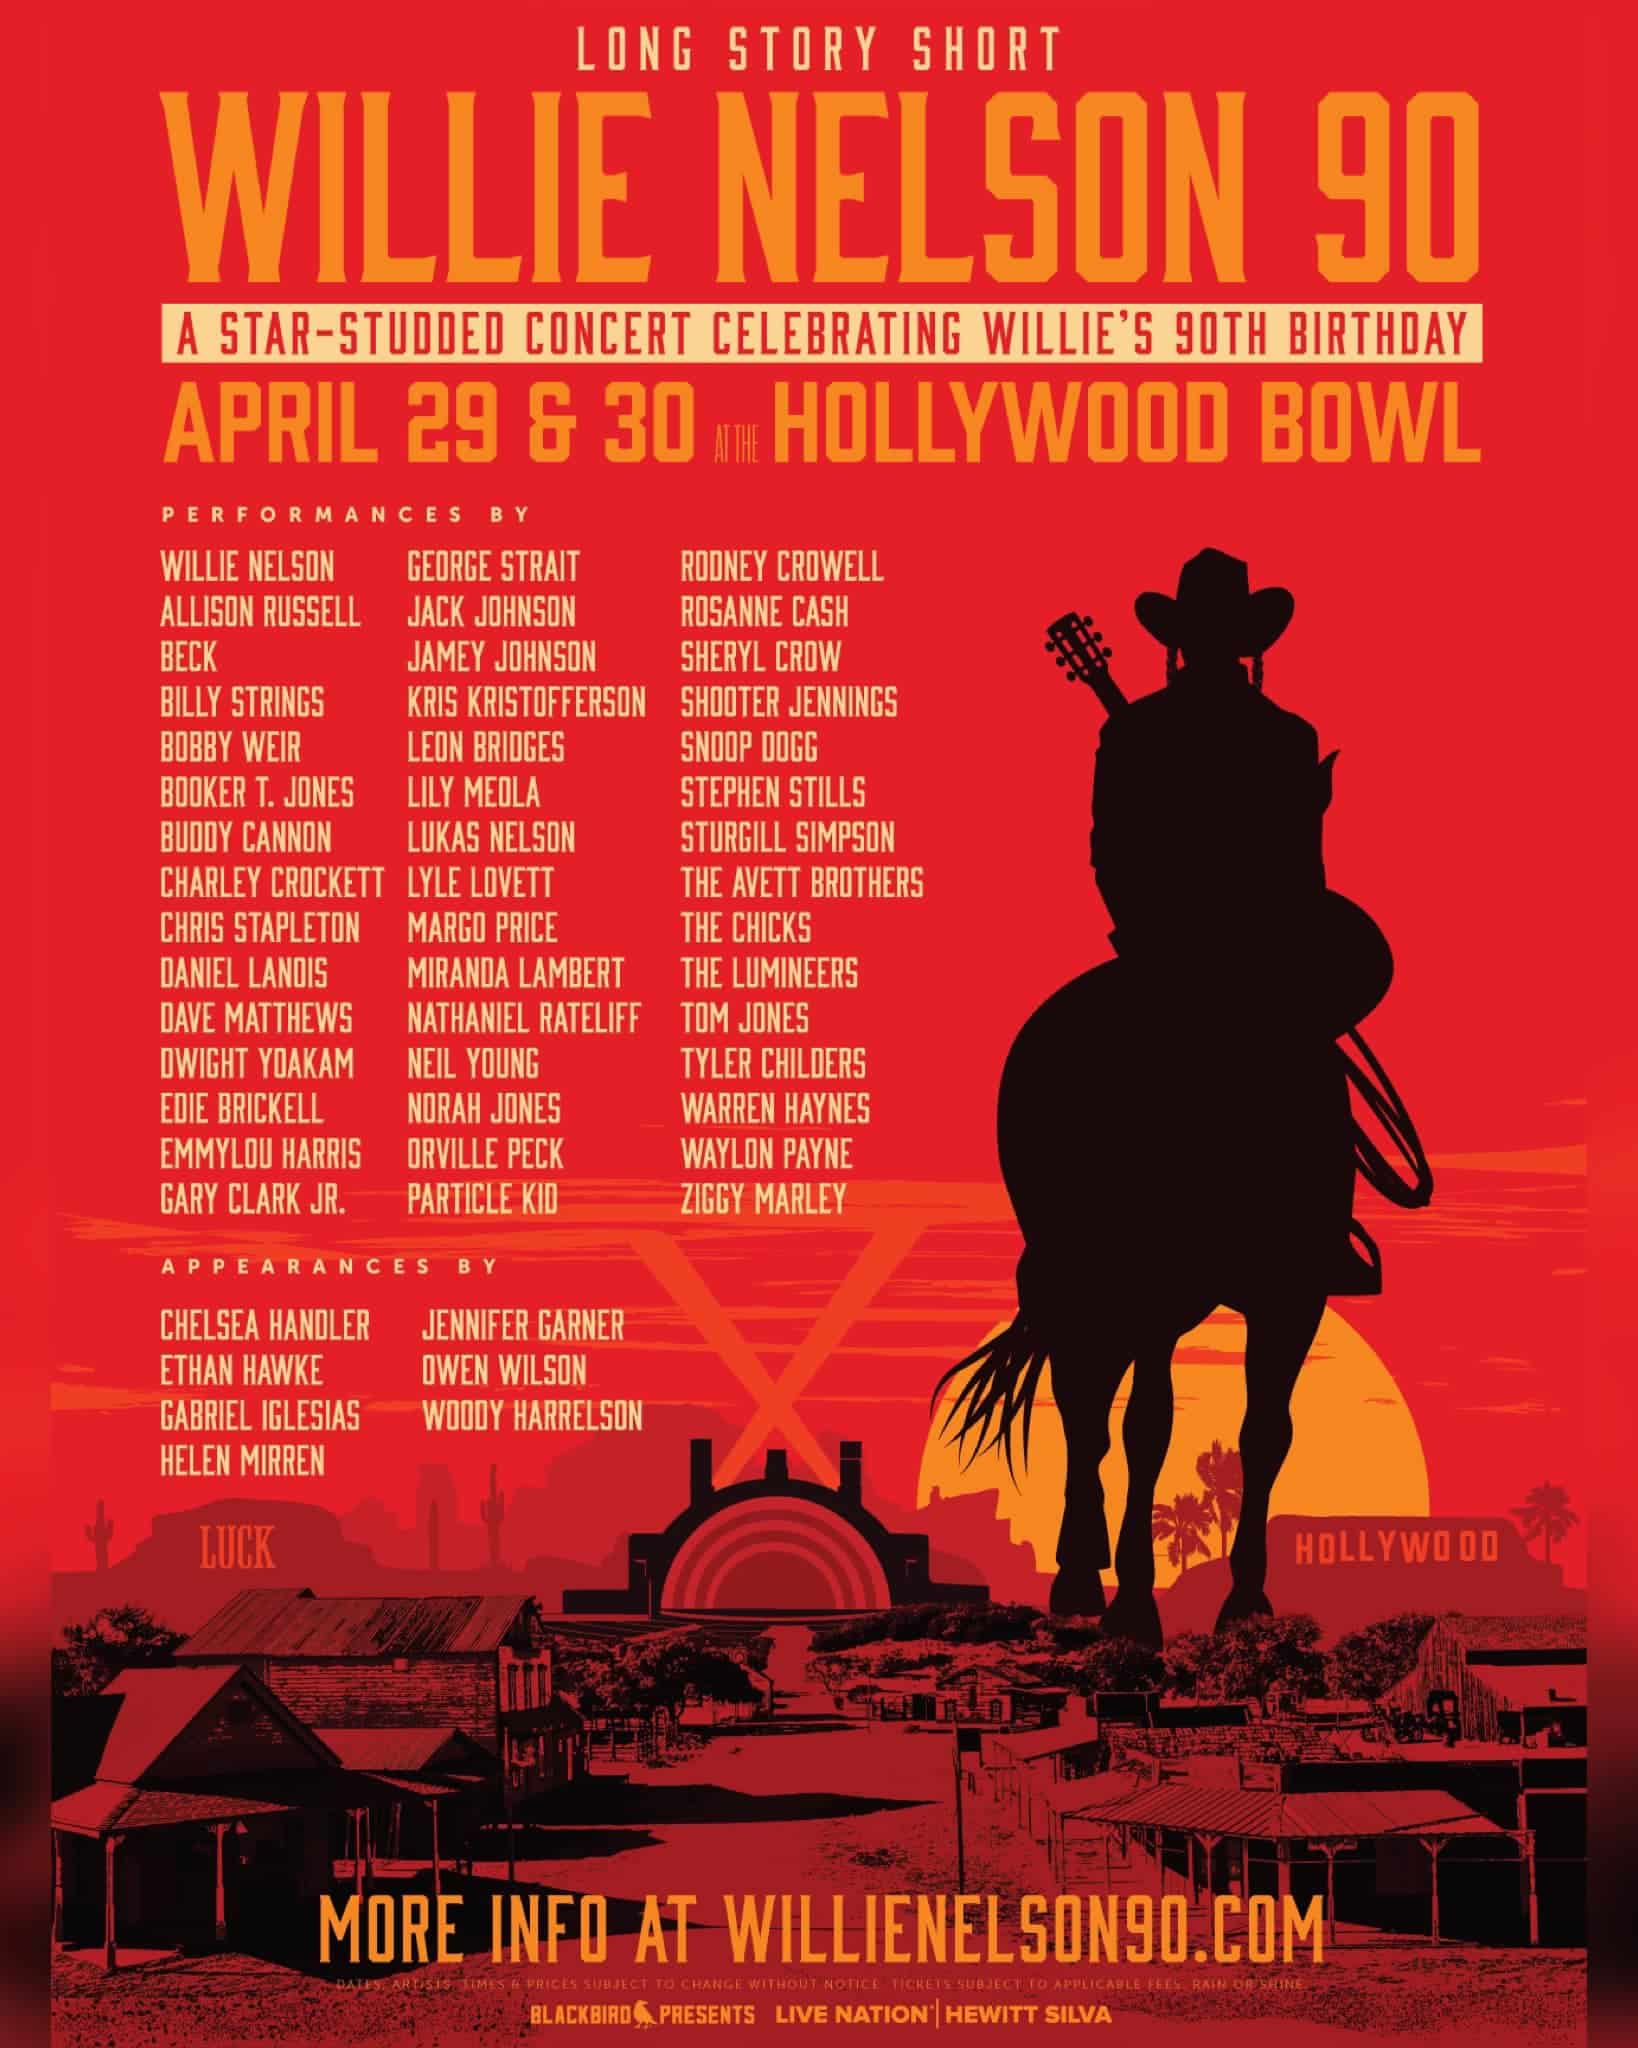 Poster for the Willie Nelson 90th birthday concert